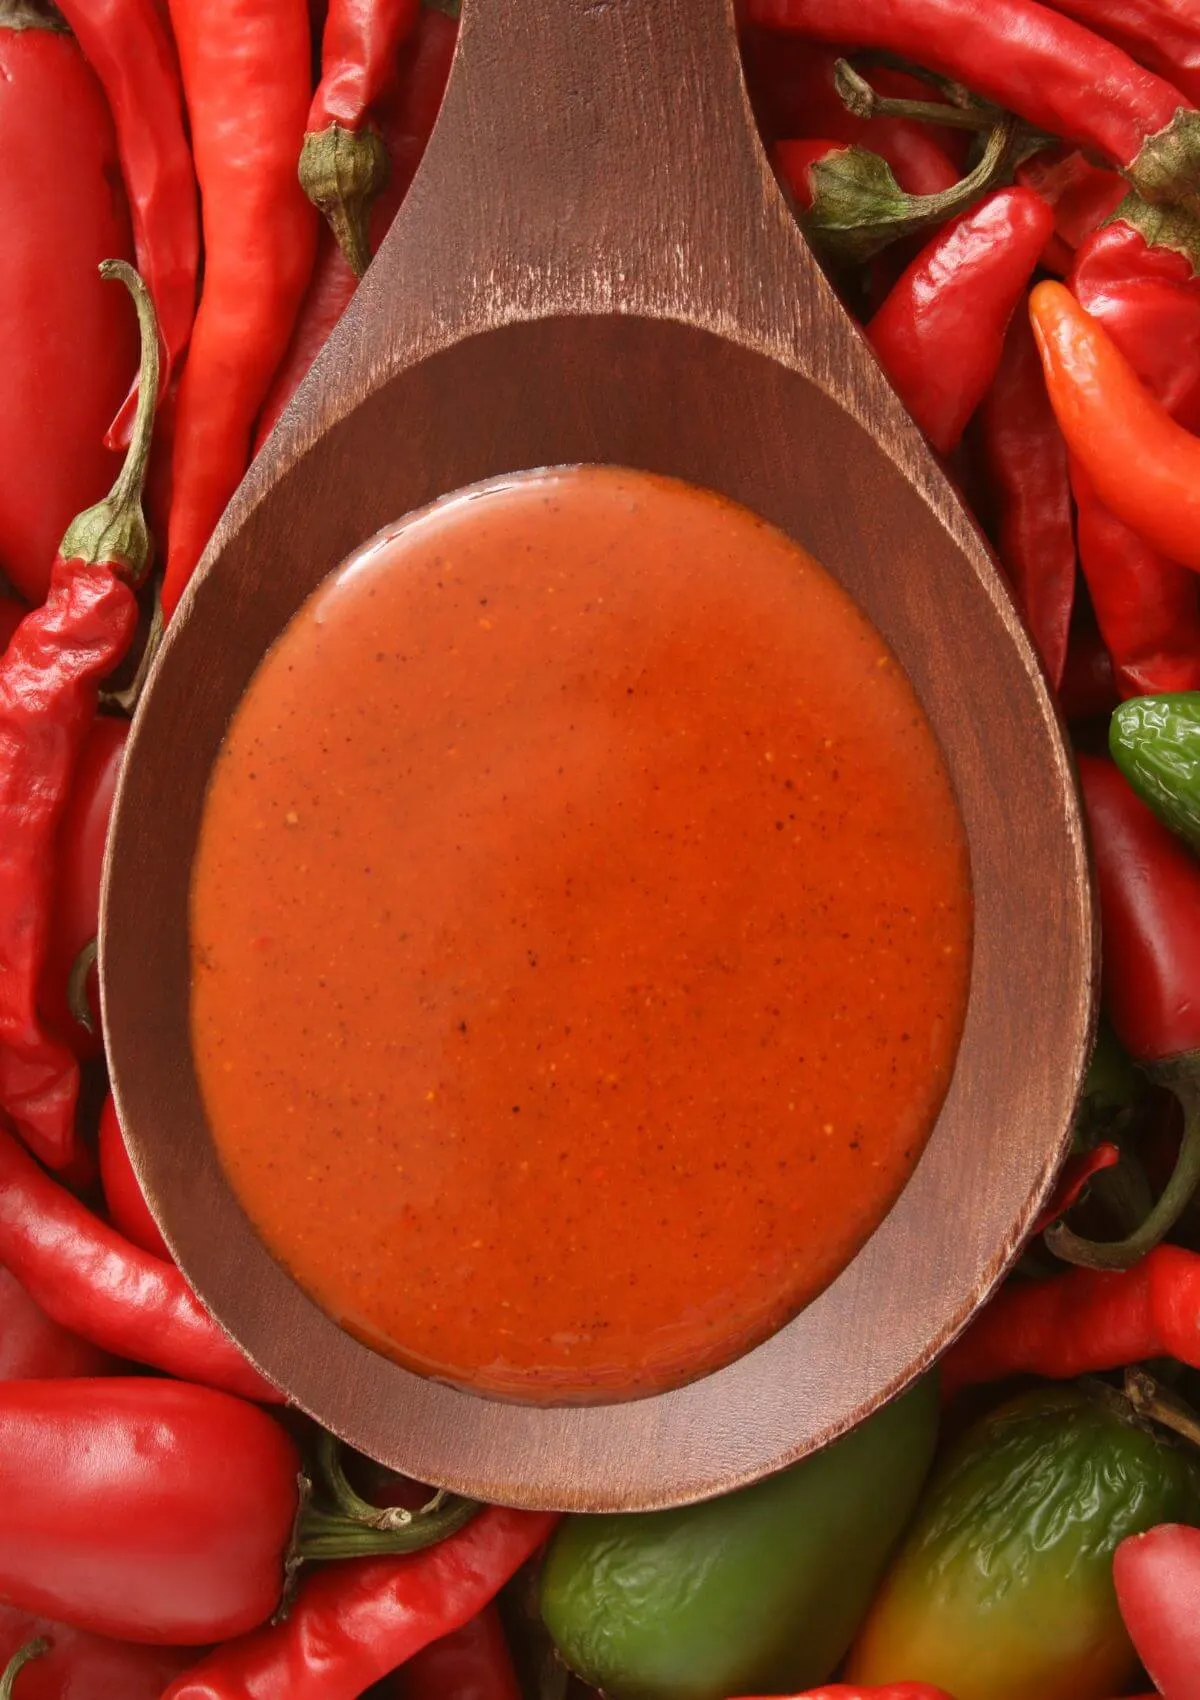 Hot sauce as souvenirs from the USA for daring foodies